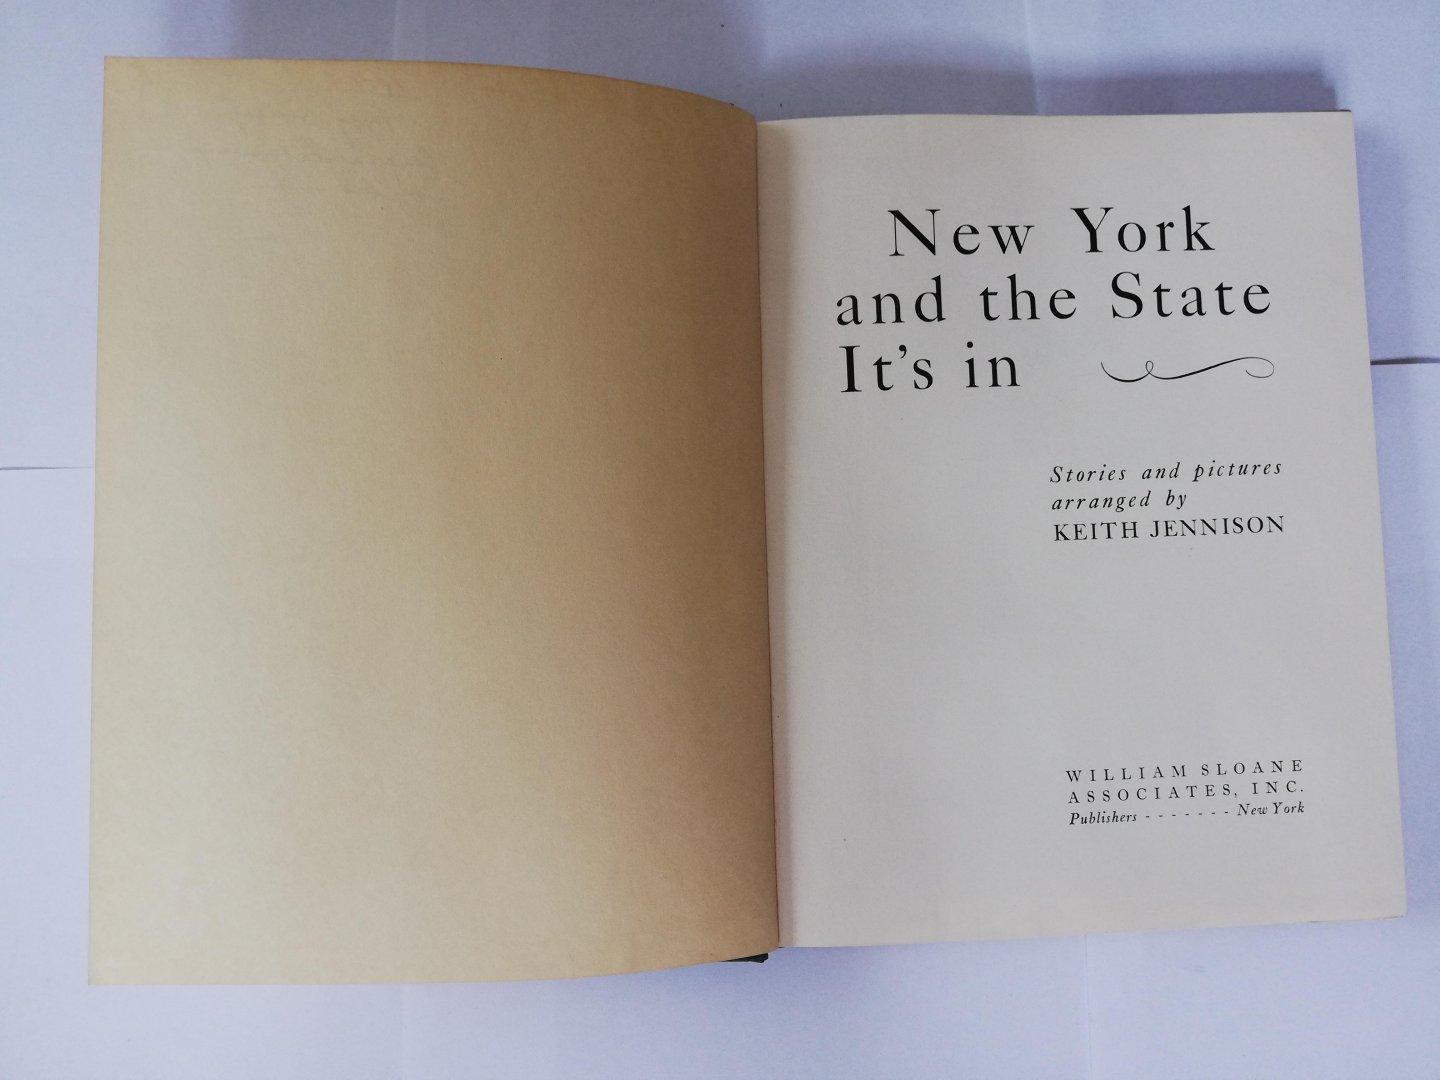 Jennison, Keith - New York and the State it's in